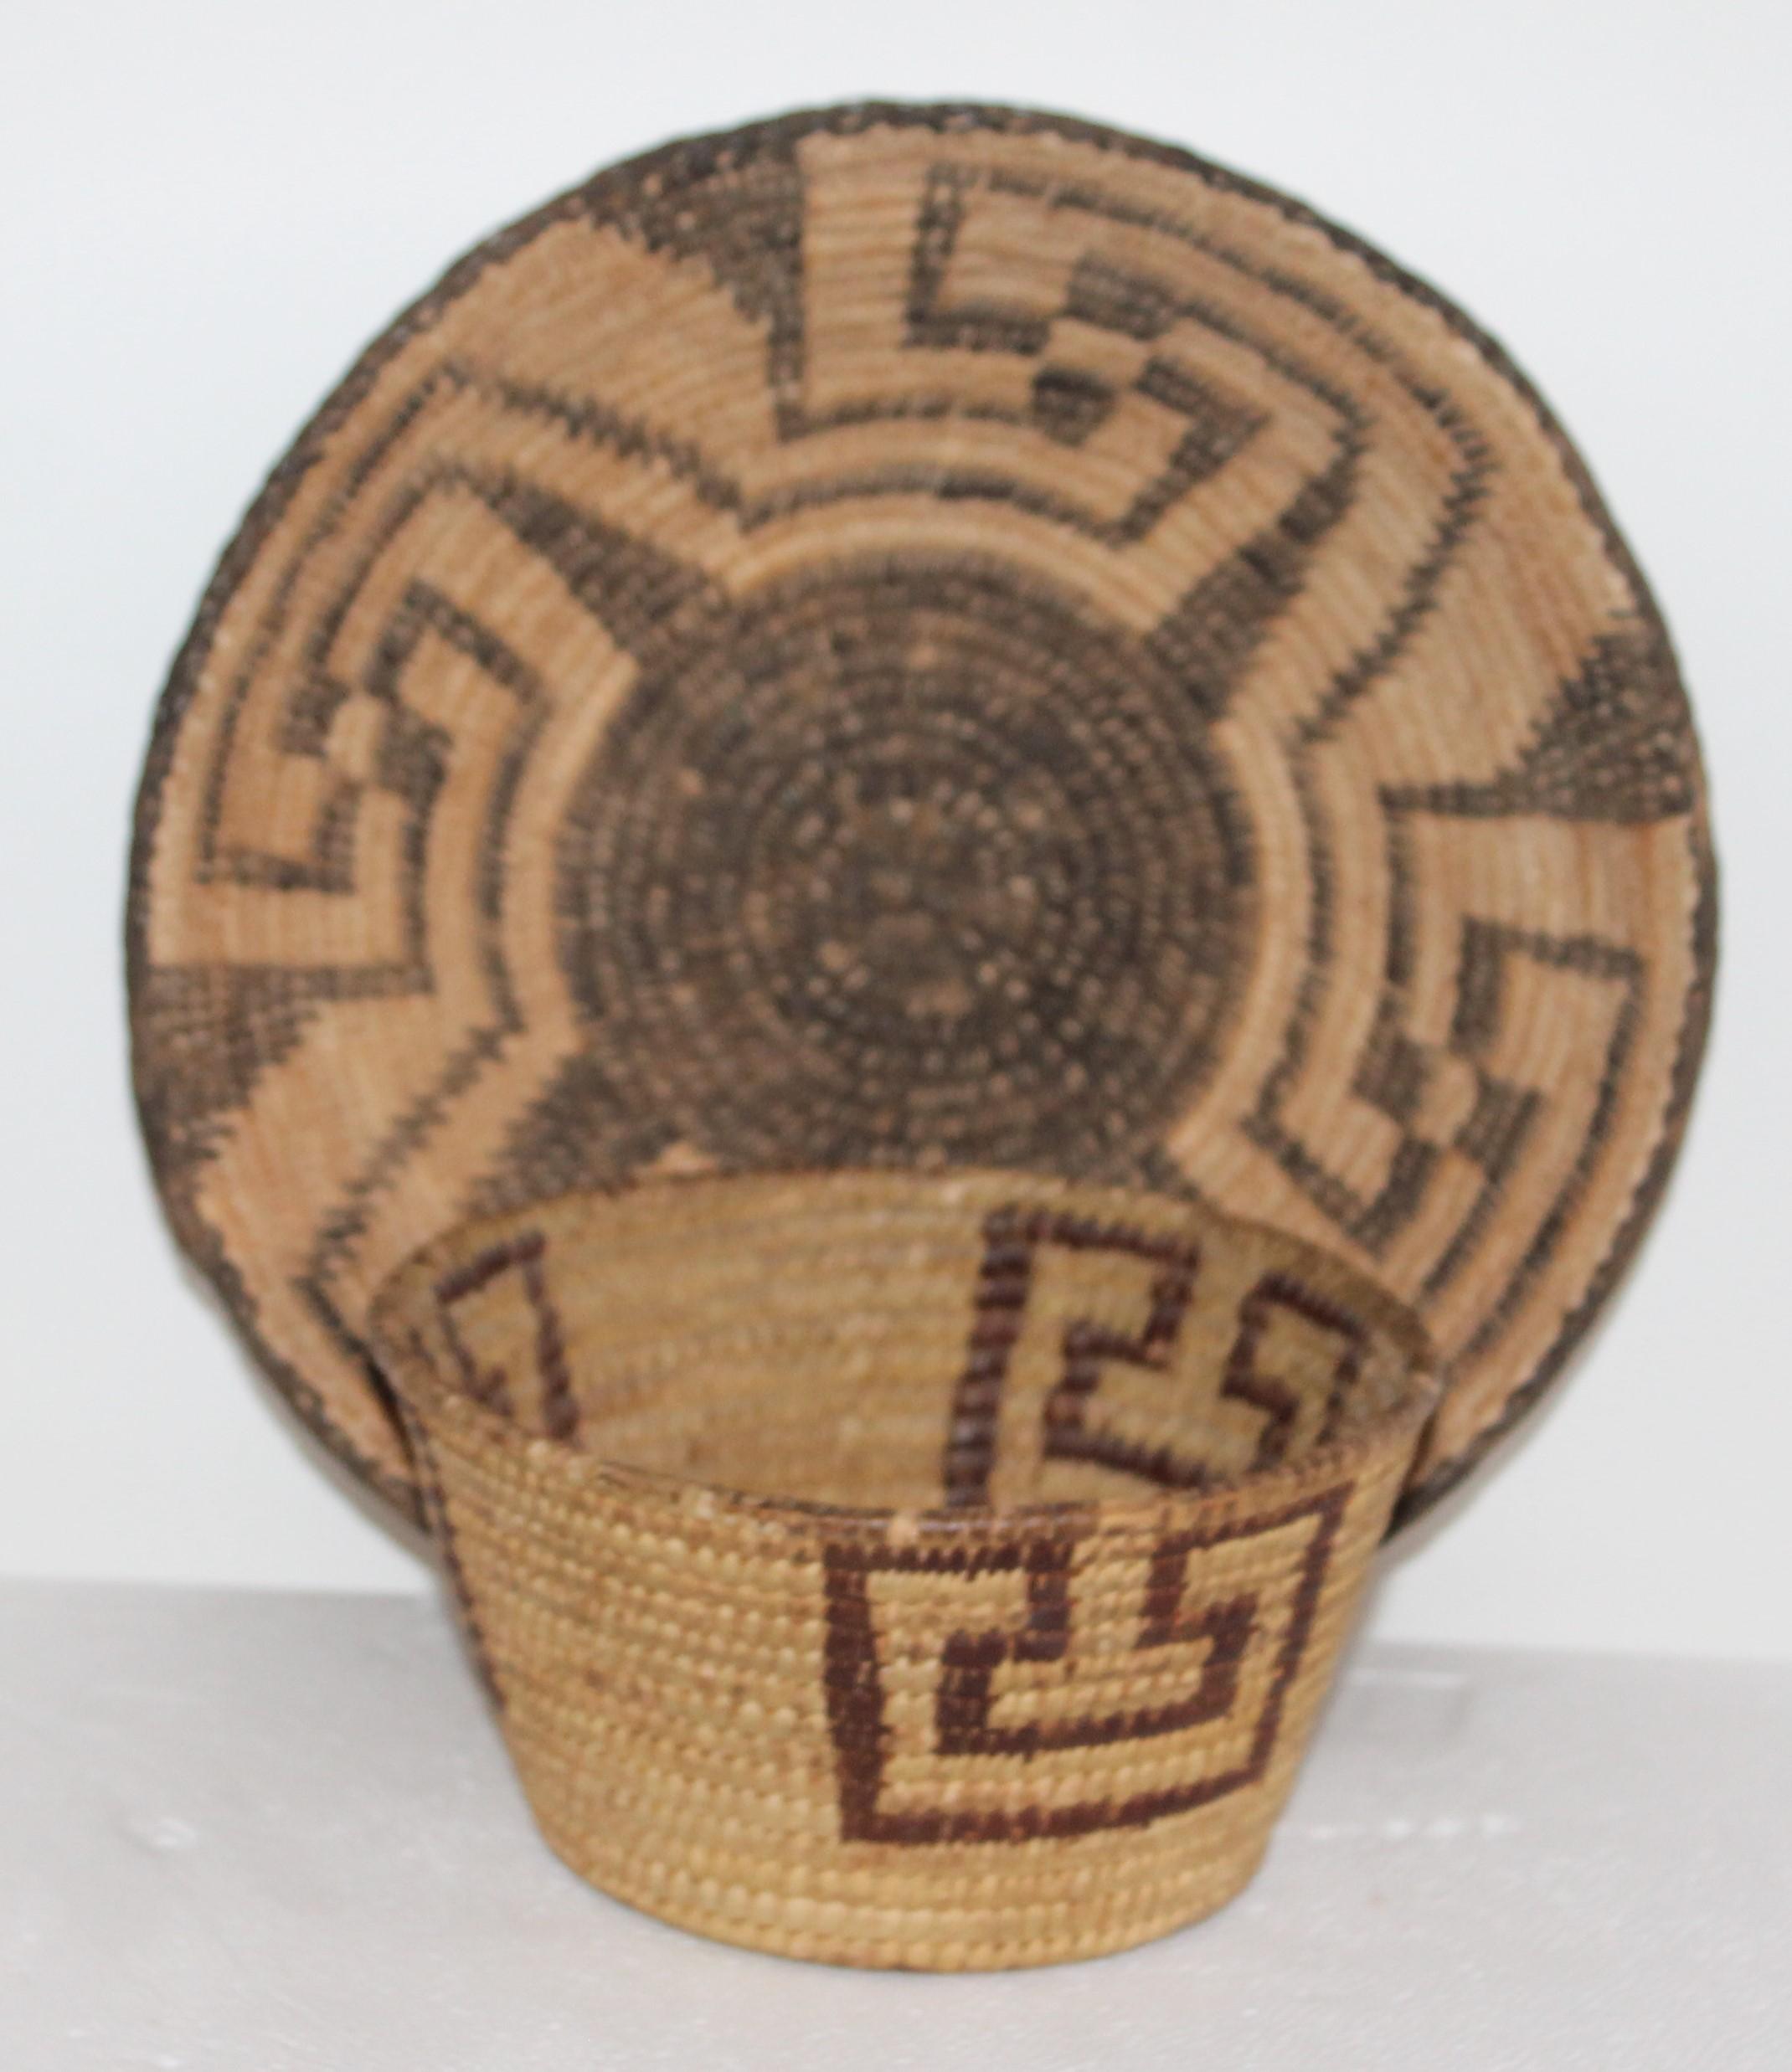 These three Pima Indian handwoven baskets are in fine condition. One large tray is in pristine condition
The second tall coil basket is geometric as well
The third smallest basket is in fine condition

Measures: Small basket 6.5 x 3.5
Large